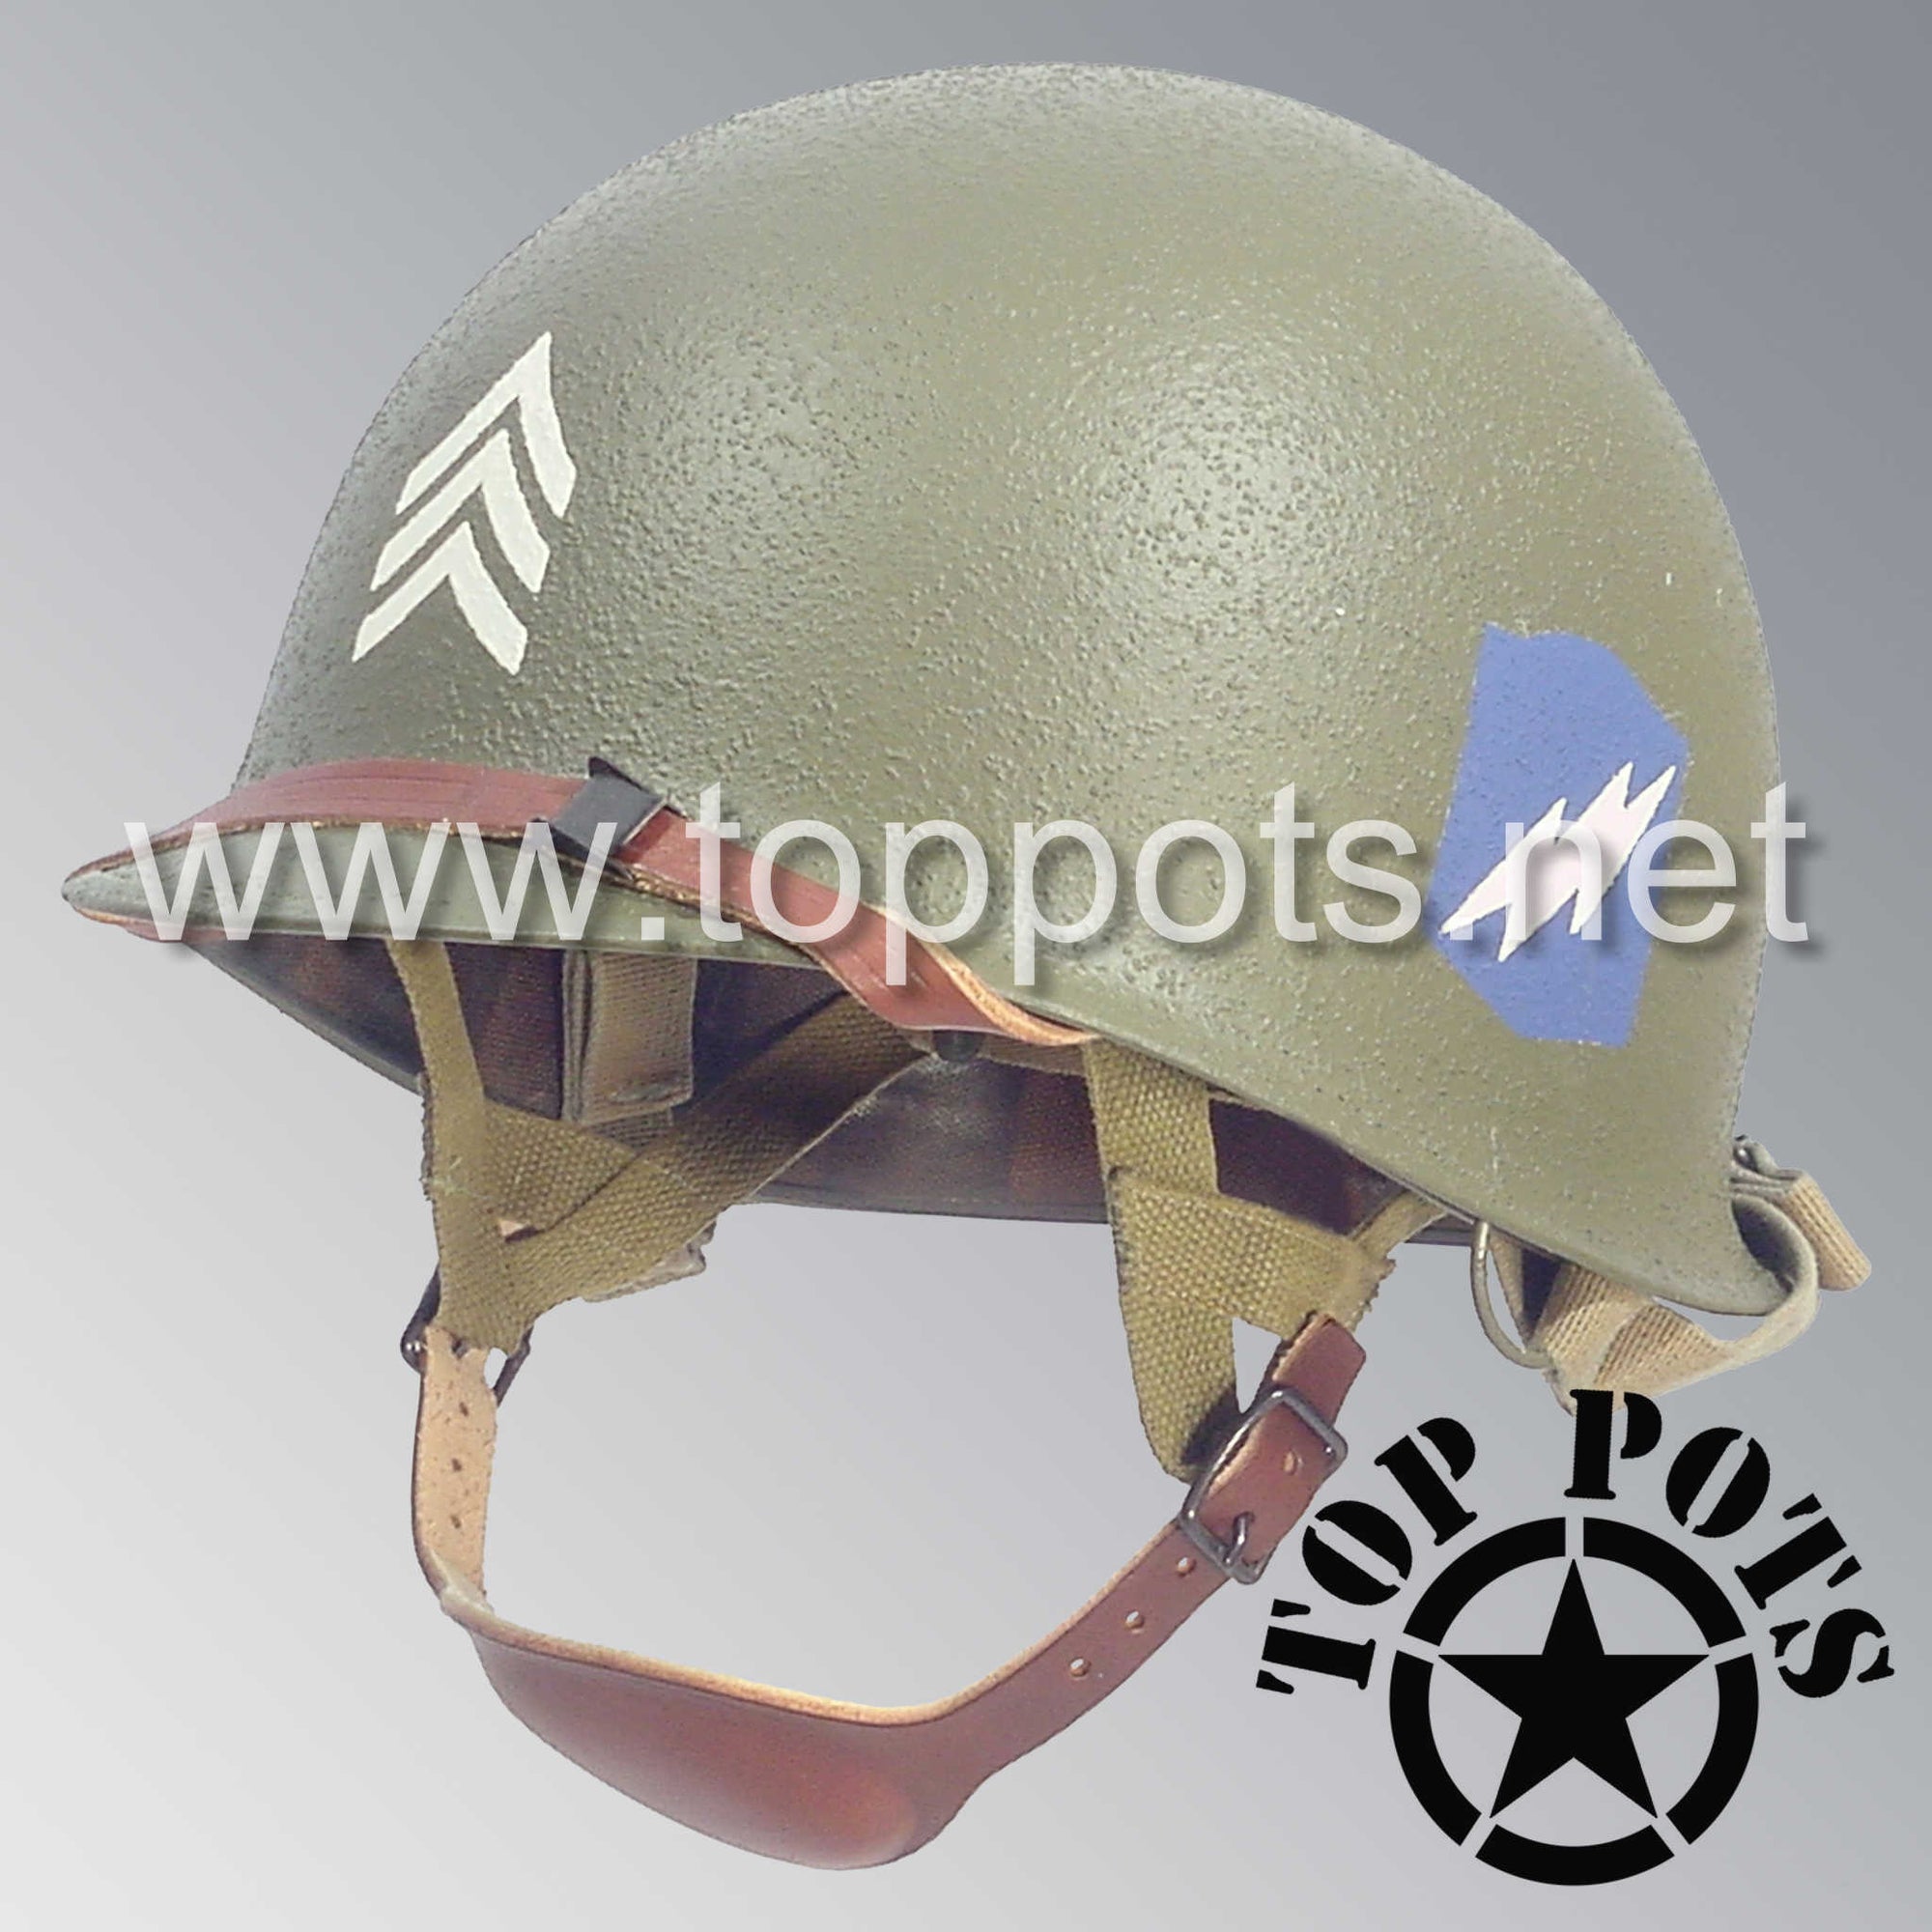 WWII US Army Restored Original M2 Paratrooper Airborne Helmet D Bale Shell and Liner with 507th PIR NCO Emblem